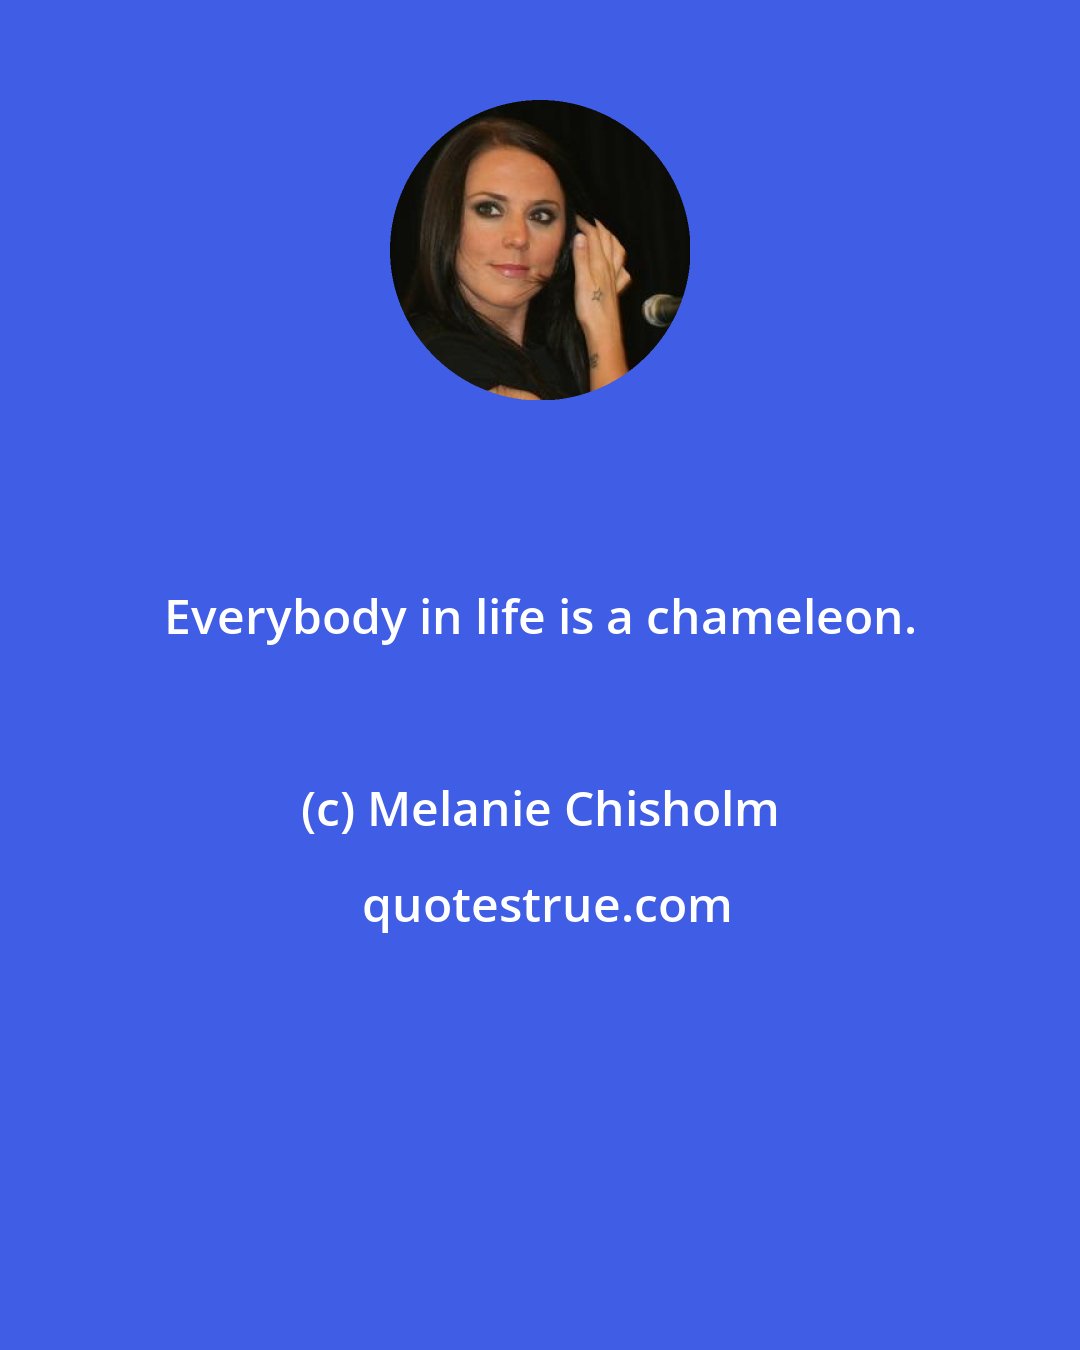 Melanie Chisholm: Everybody in life is a chameleon.